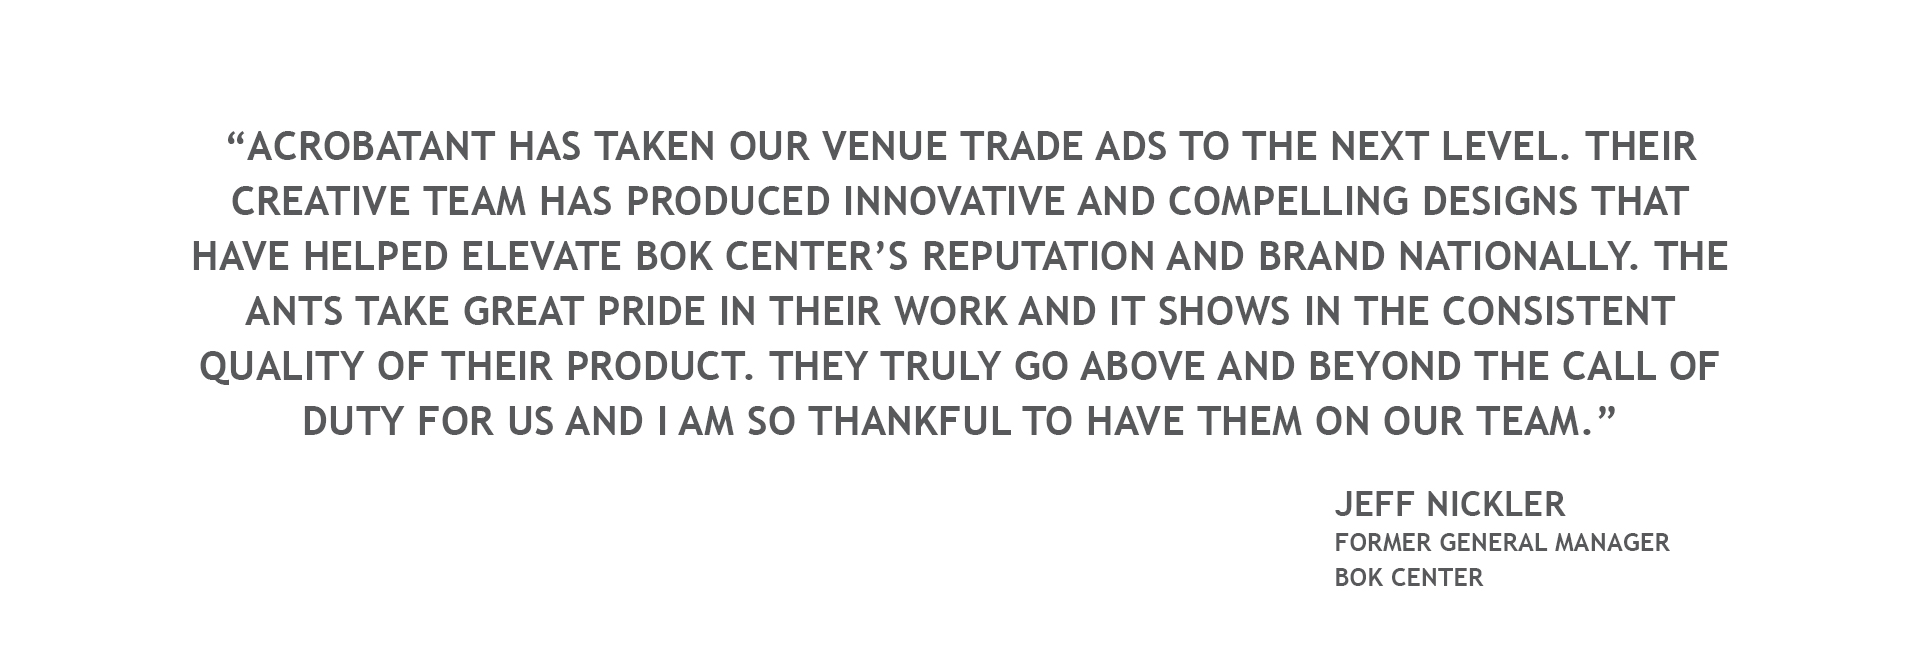 Client quote from the BOK Former General Manager